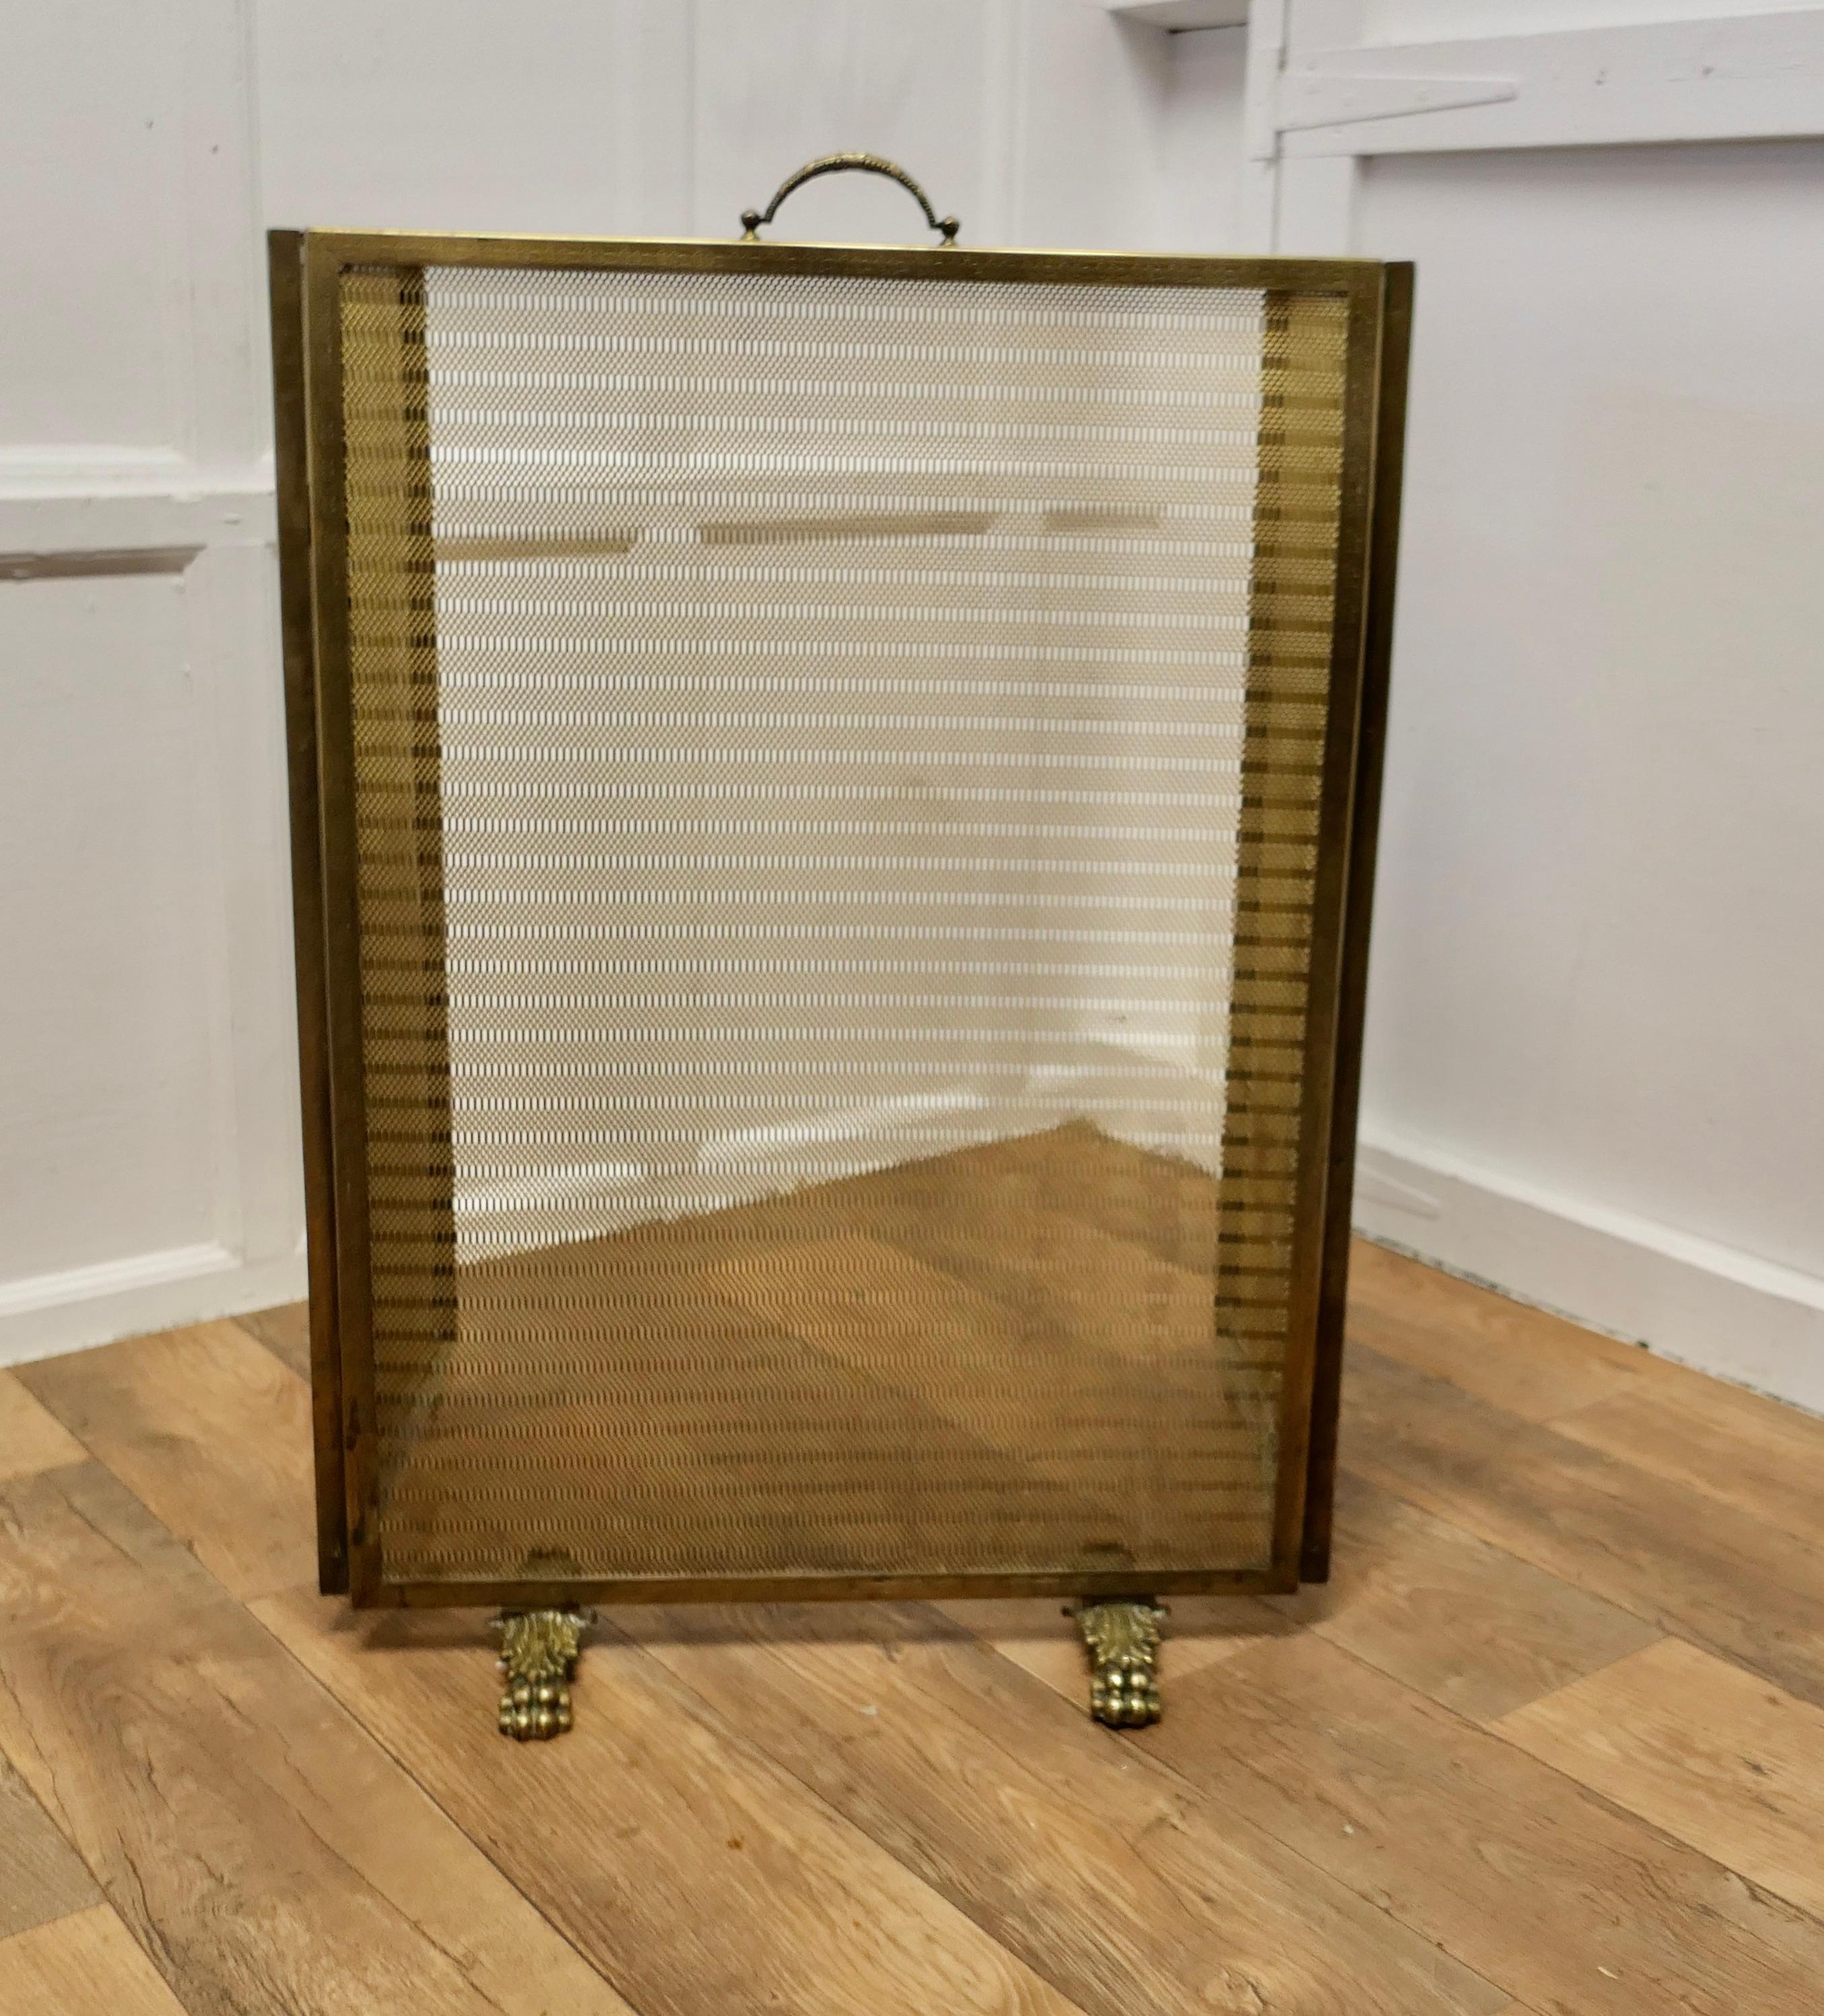 Very Large Adjustable French Chateau Brass Fire Screen/Fire Guard

This is a very large Heavy Quality Screen, it is hinged to allow the shape to be altered to fit the fire 
The guard has a decorative heavy brass mesh infill and double sided Lions